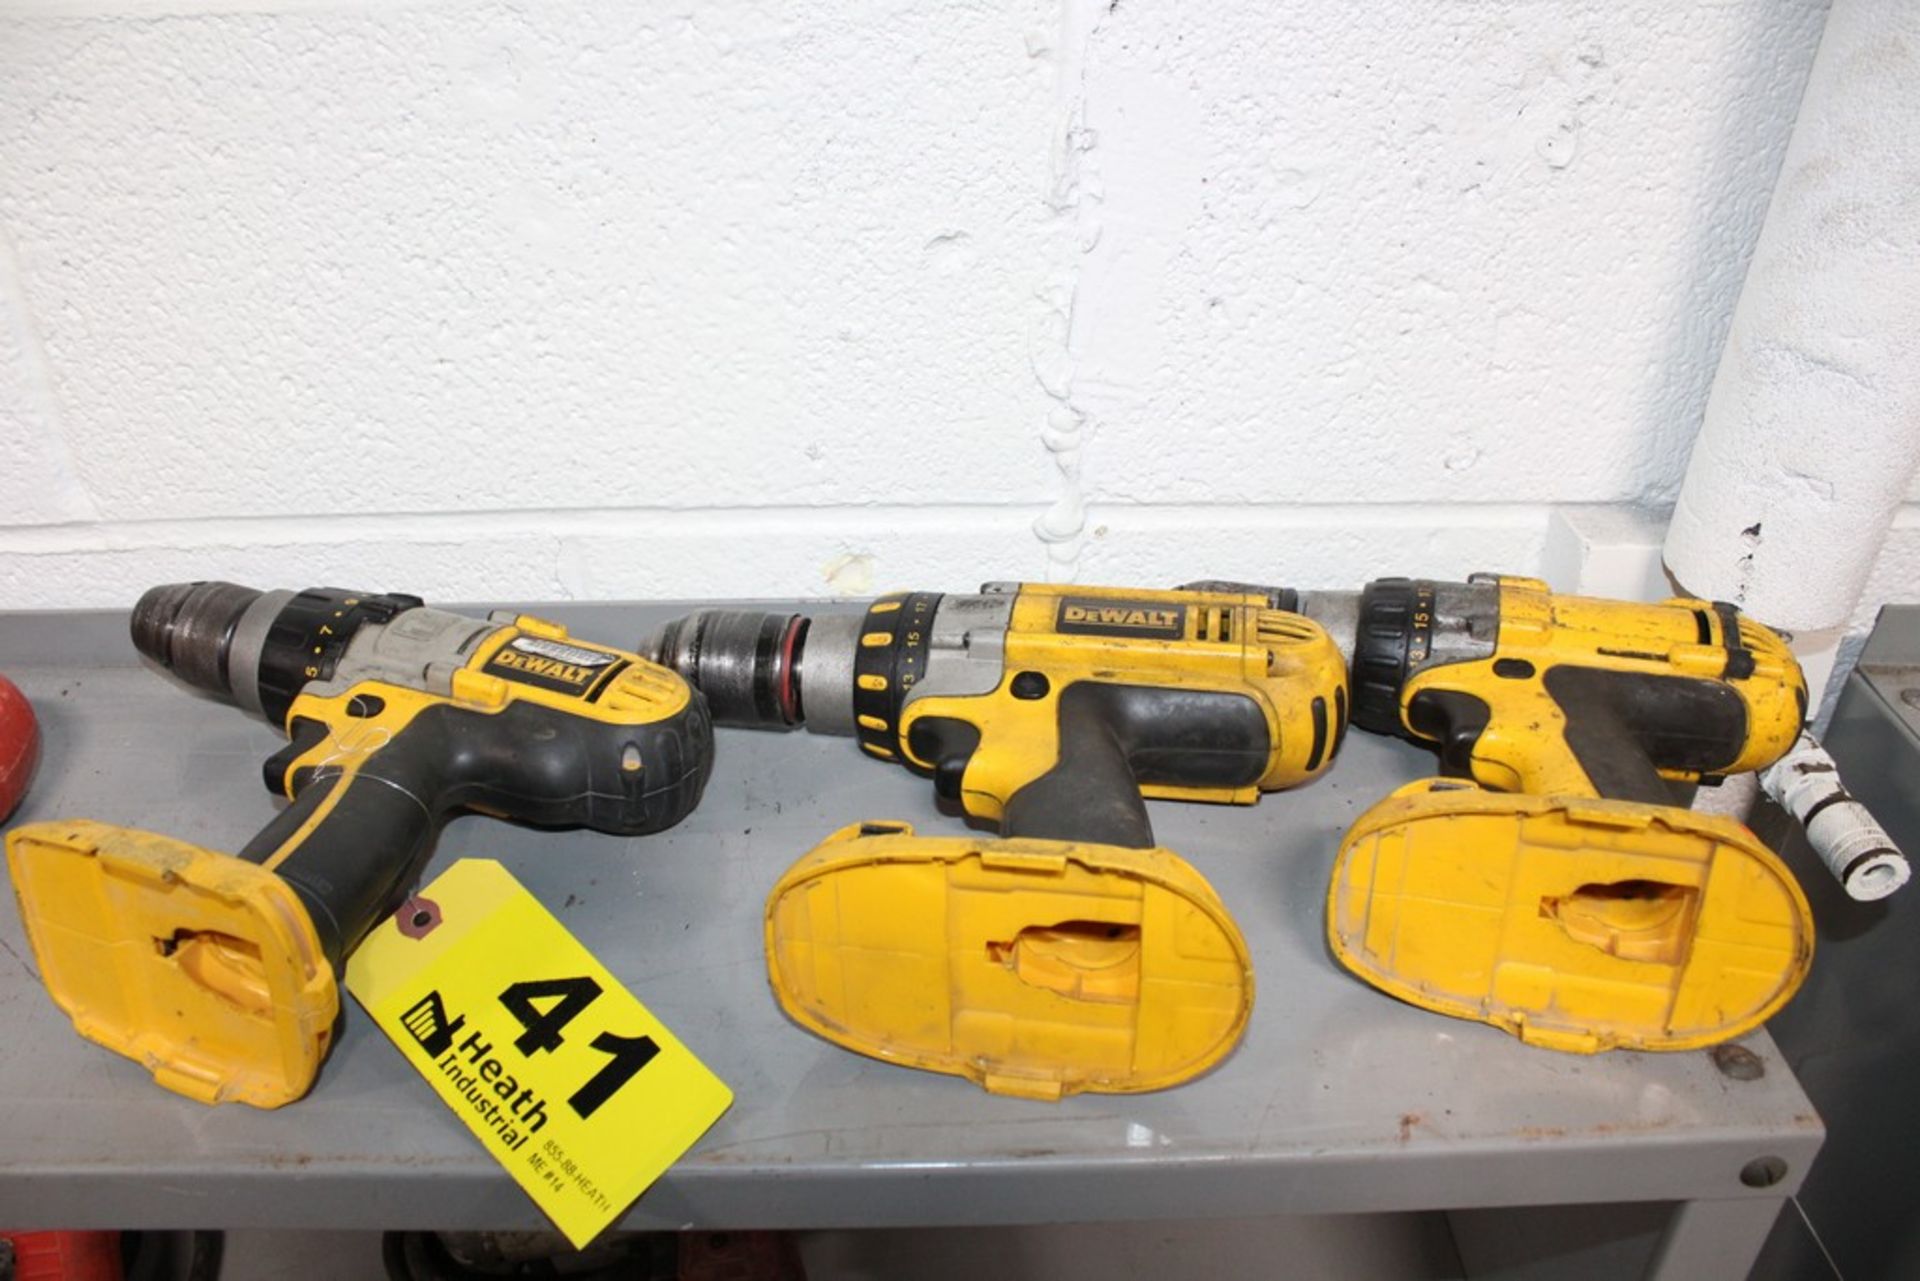 DEWALT MODEL DC920 XRP, DCD950, AND DC987 18 VOLT 1/2" CORDLESS DRILL DRIVERS (NO BATTERY OR